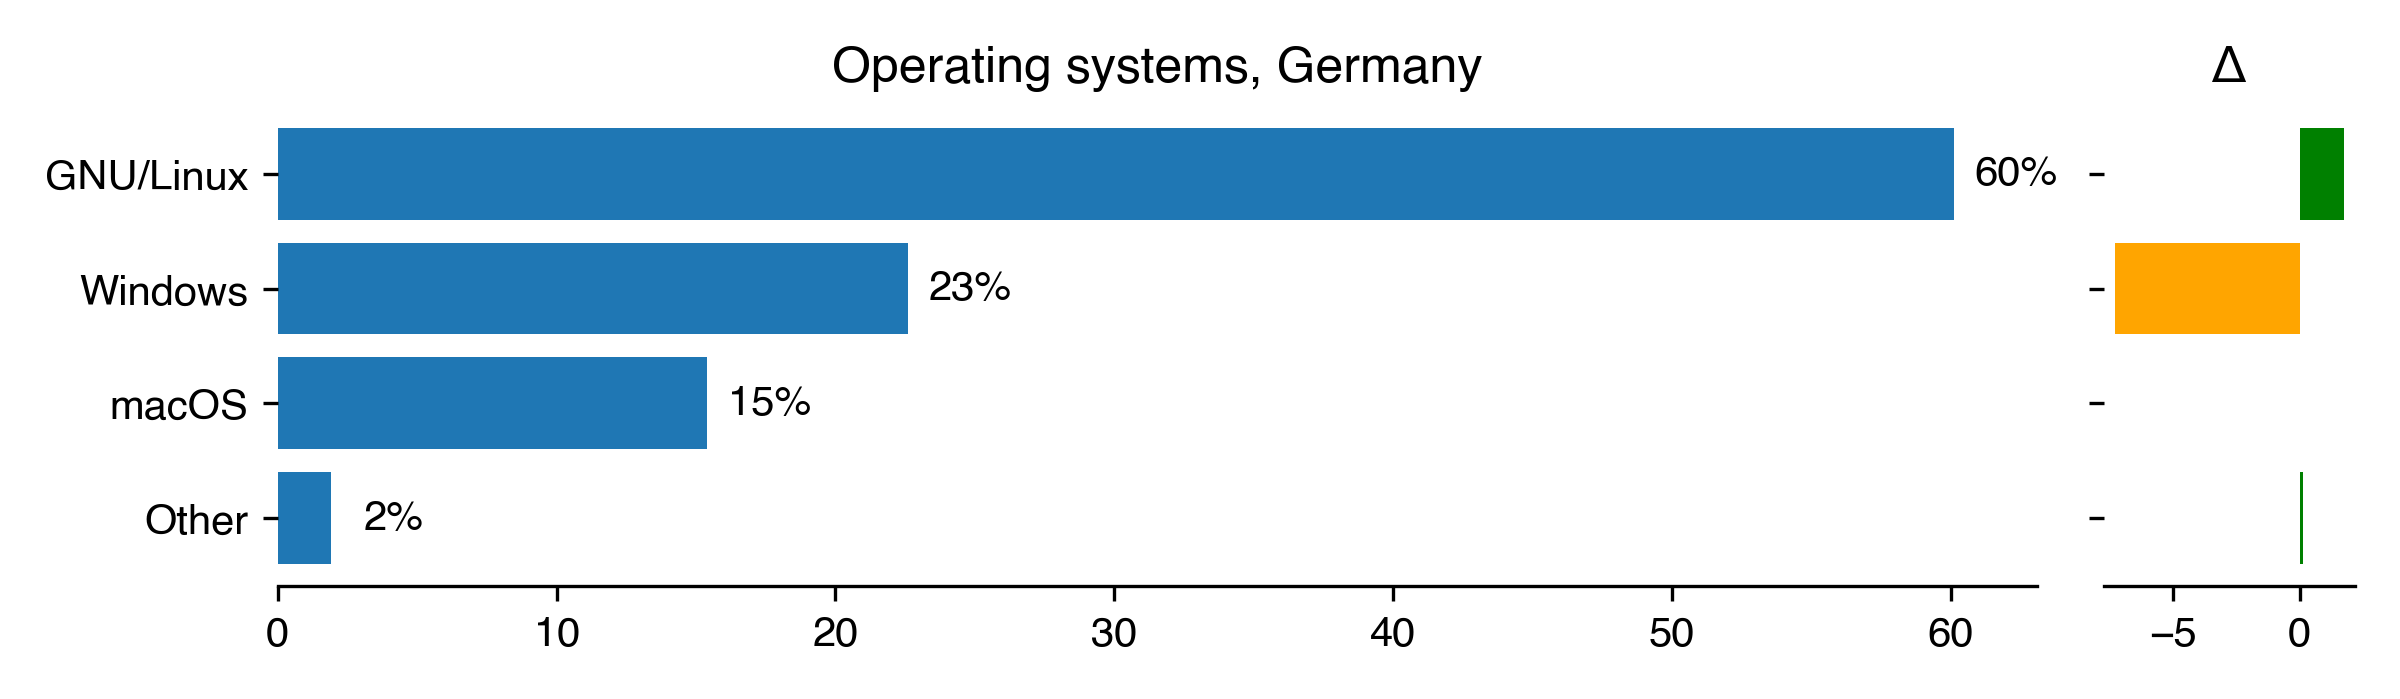 operating-systems